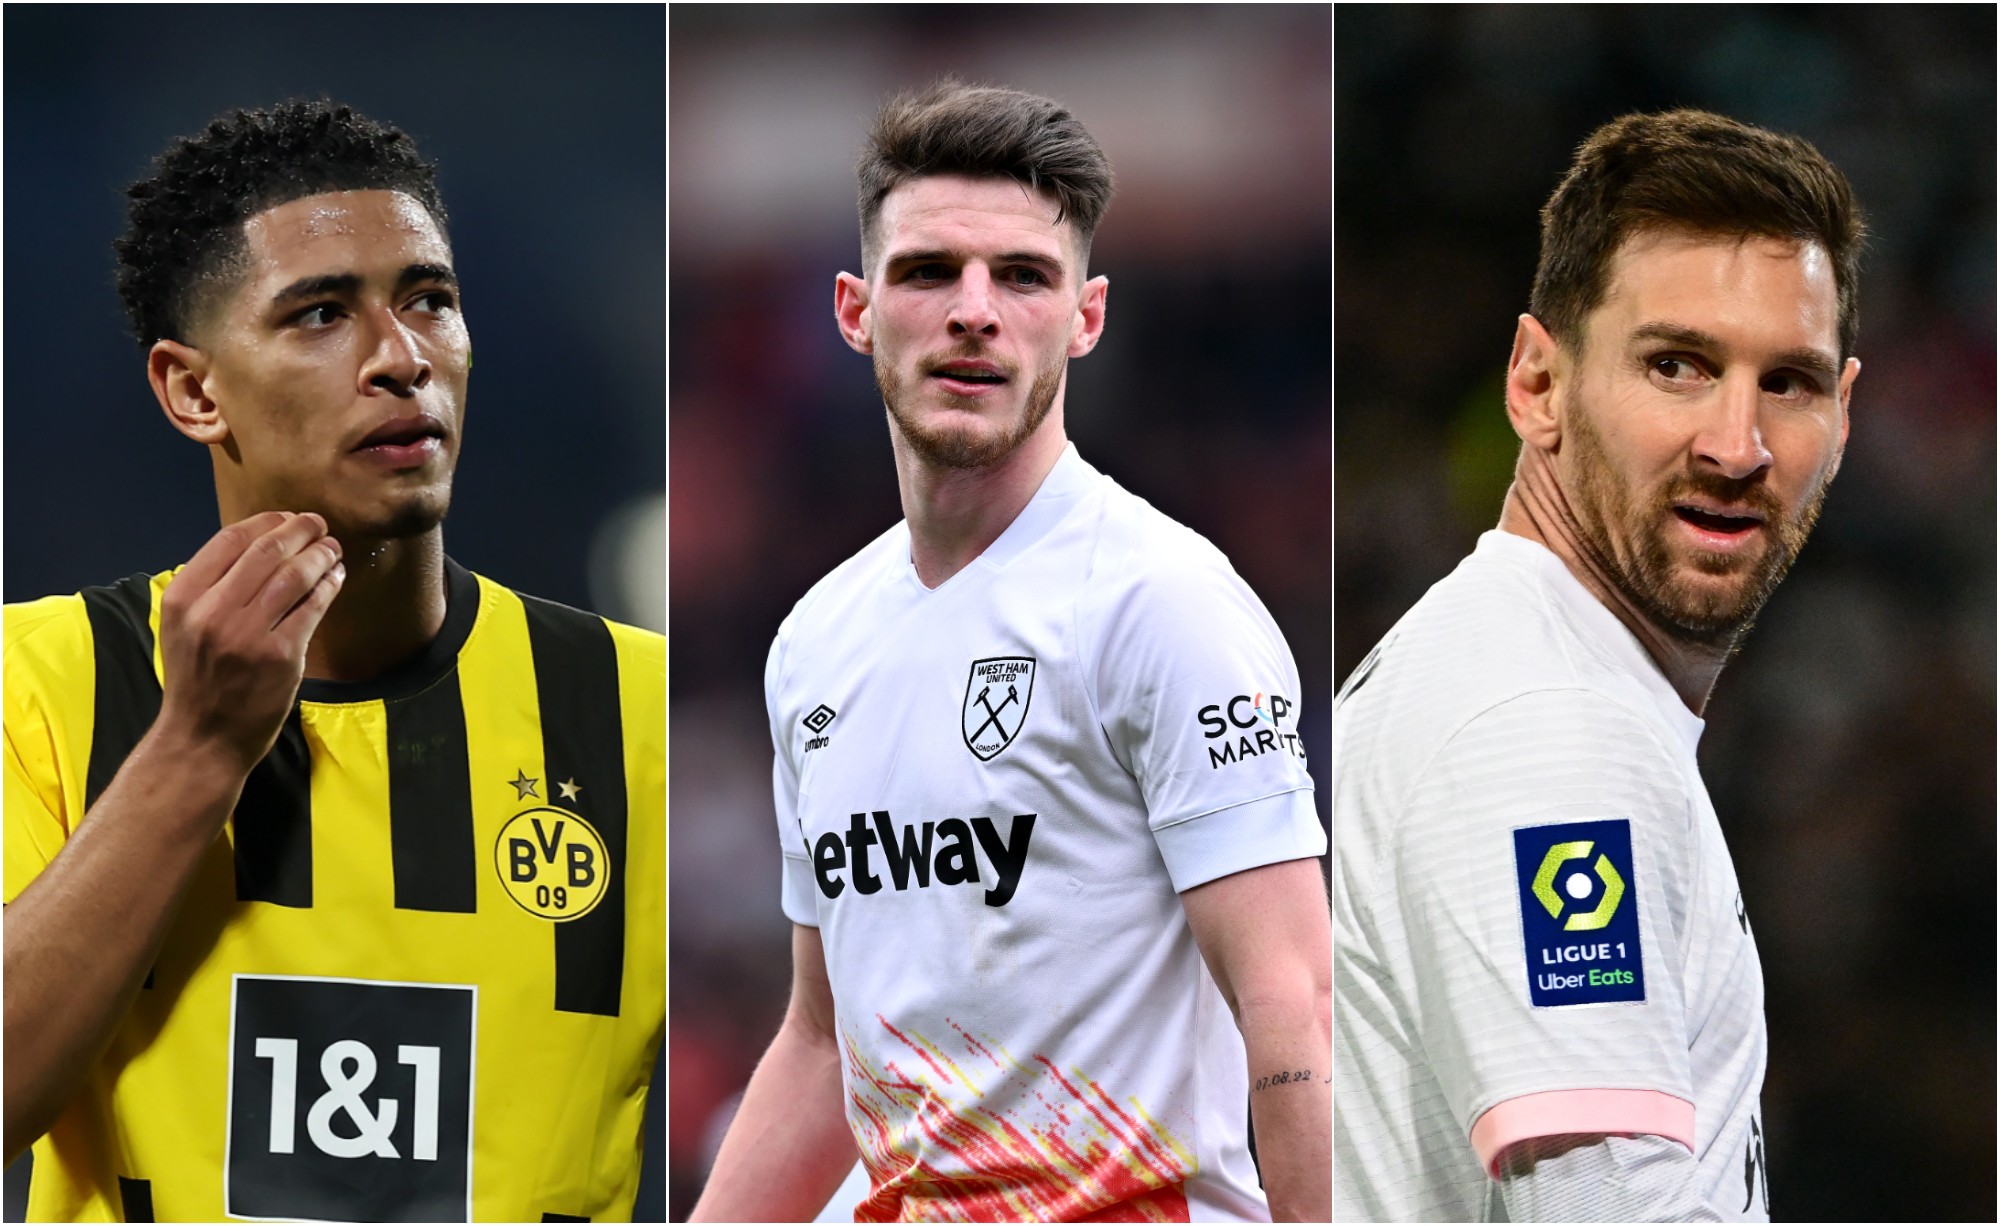  Arsenal summer transfer targets 2024/25 include Declan Rice, Jarrod Bowen, and Lionel Messi.